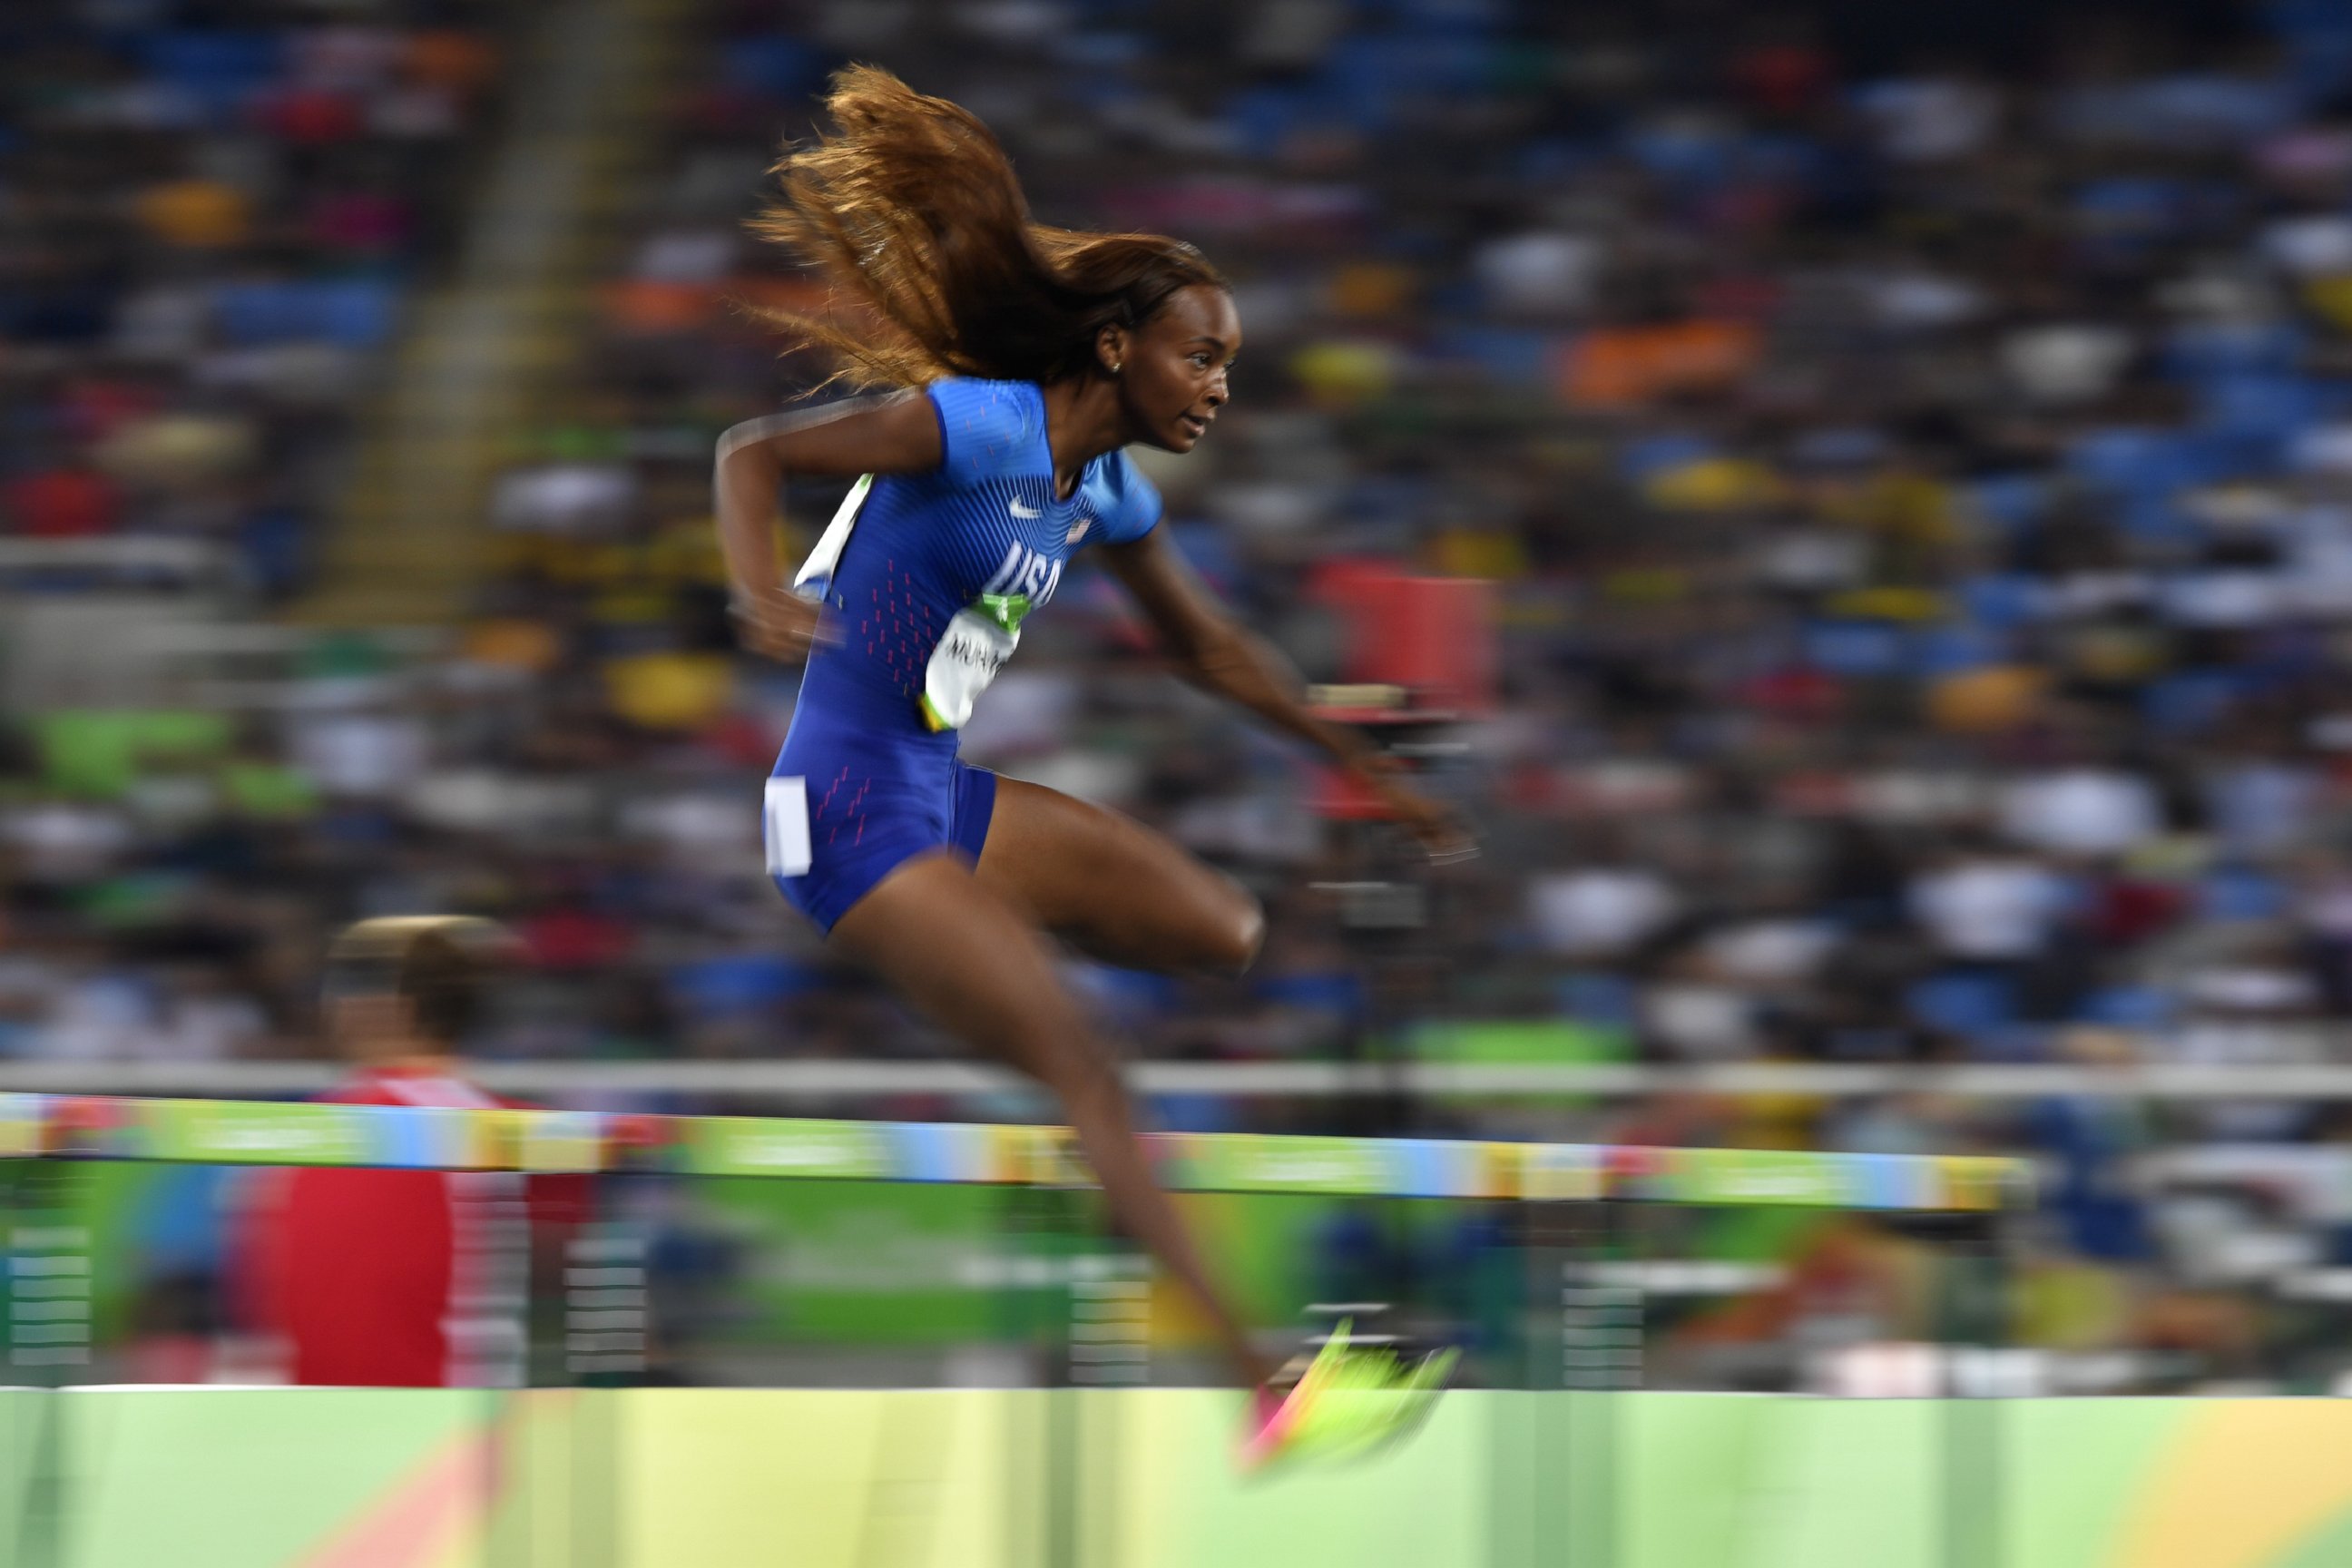 PHOTO: USA's Dalilah Muhammad competes in the Women's 400m Hurdles Semifinal during the athletics event at the Rio 2016 Olympic Games at the Olympic Stadium, on Aug. 16, 2016, in Rio de Janeiro.